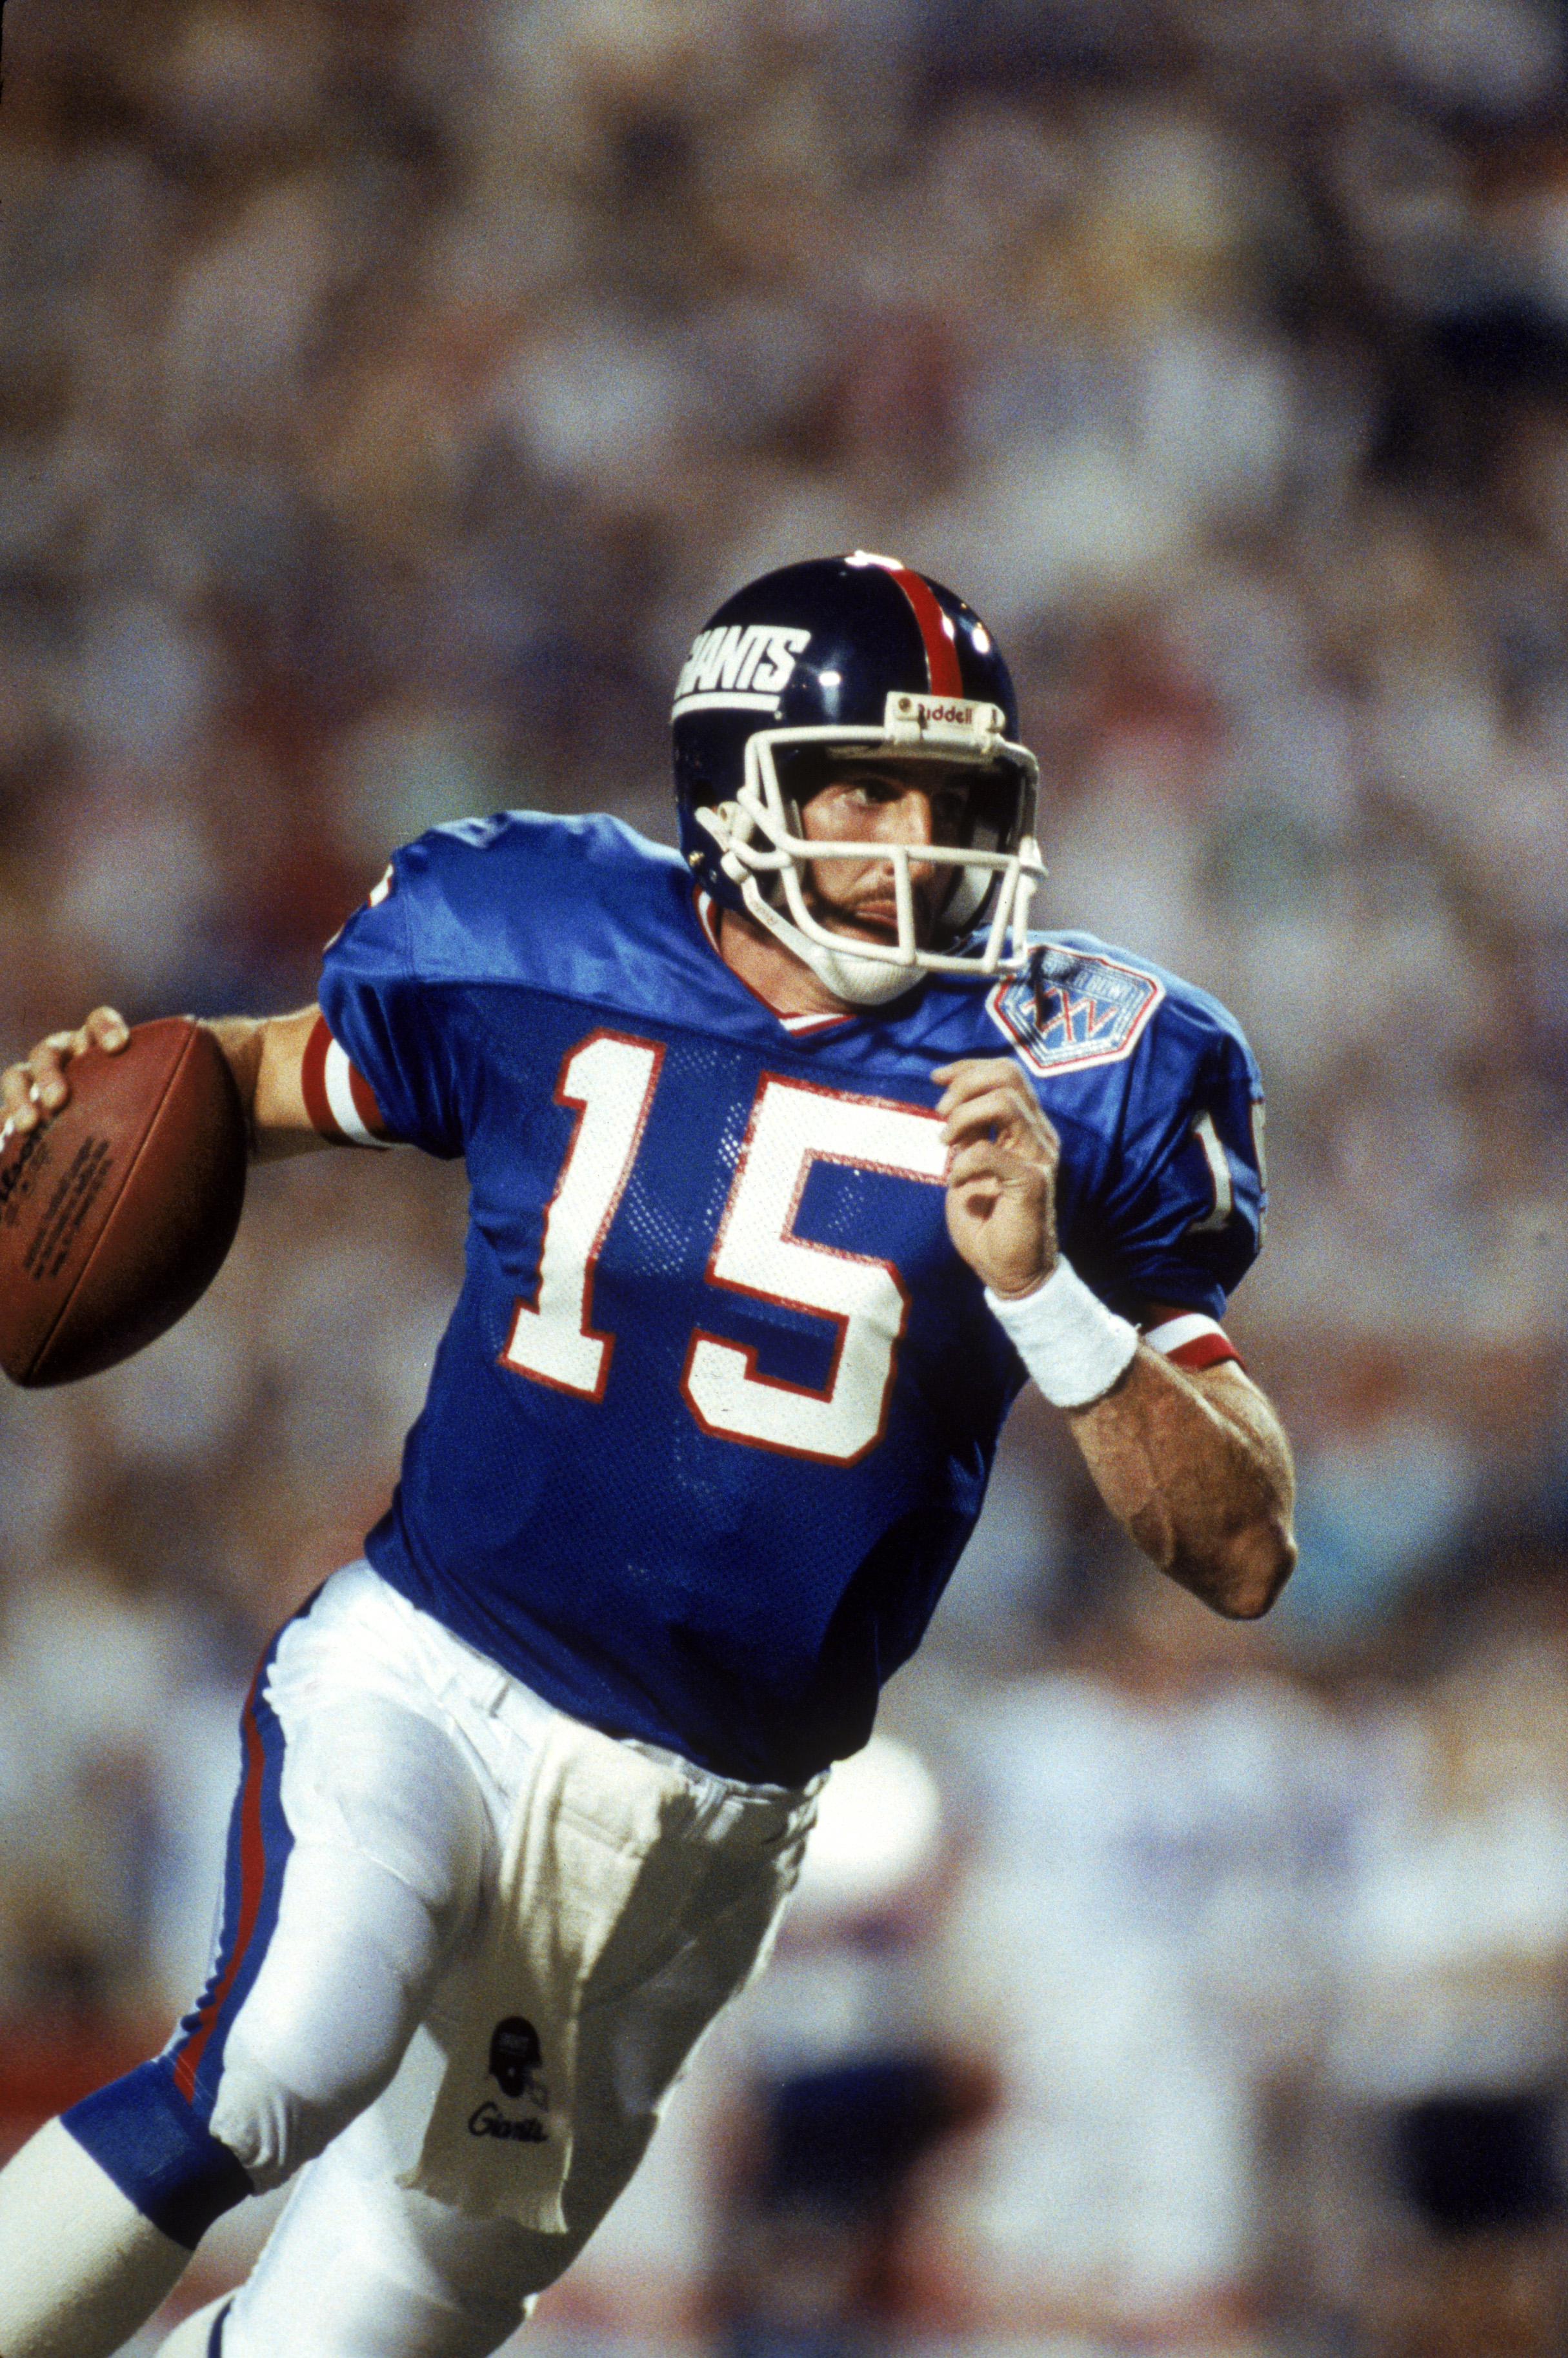 TAMPA, FL - JANUARY 27:  Quarterback Jeff Hostetler #15 of the New York Giants rolls out against the Buffalo Bills during Super Bowl XXV at Tampa Stadium on January 27, 1991 in Tampa, Florida. The Giants defeated the Bills 20-19.  (Photo by George Rose/Ge